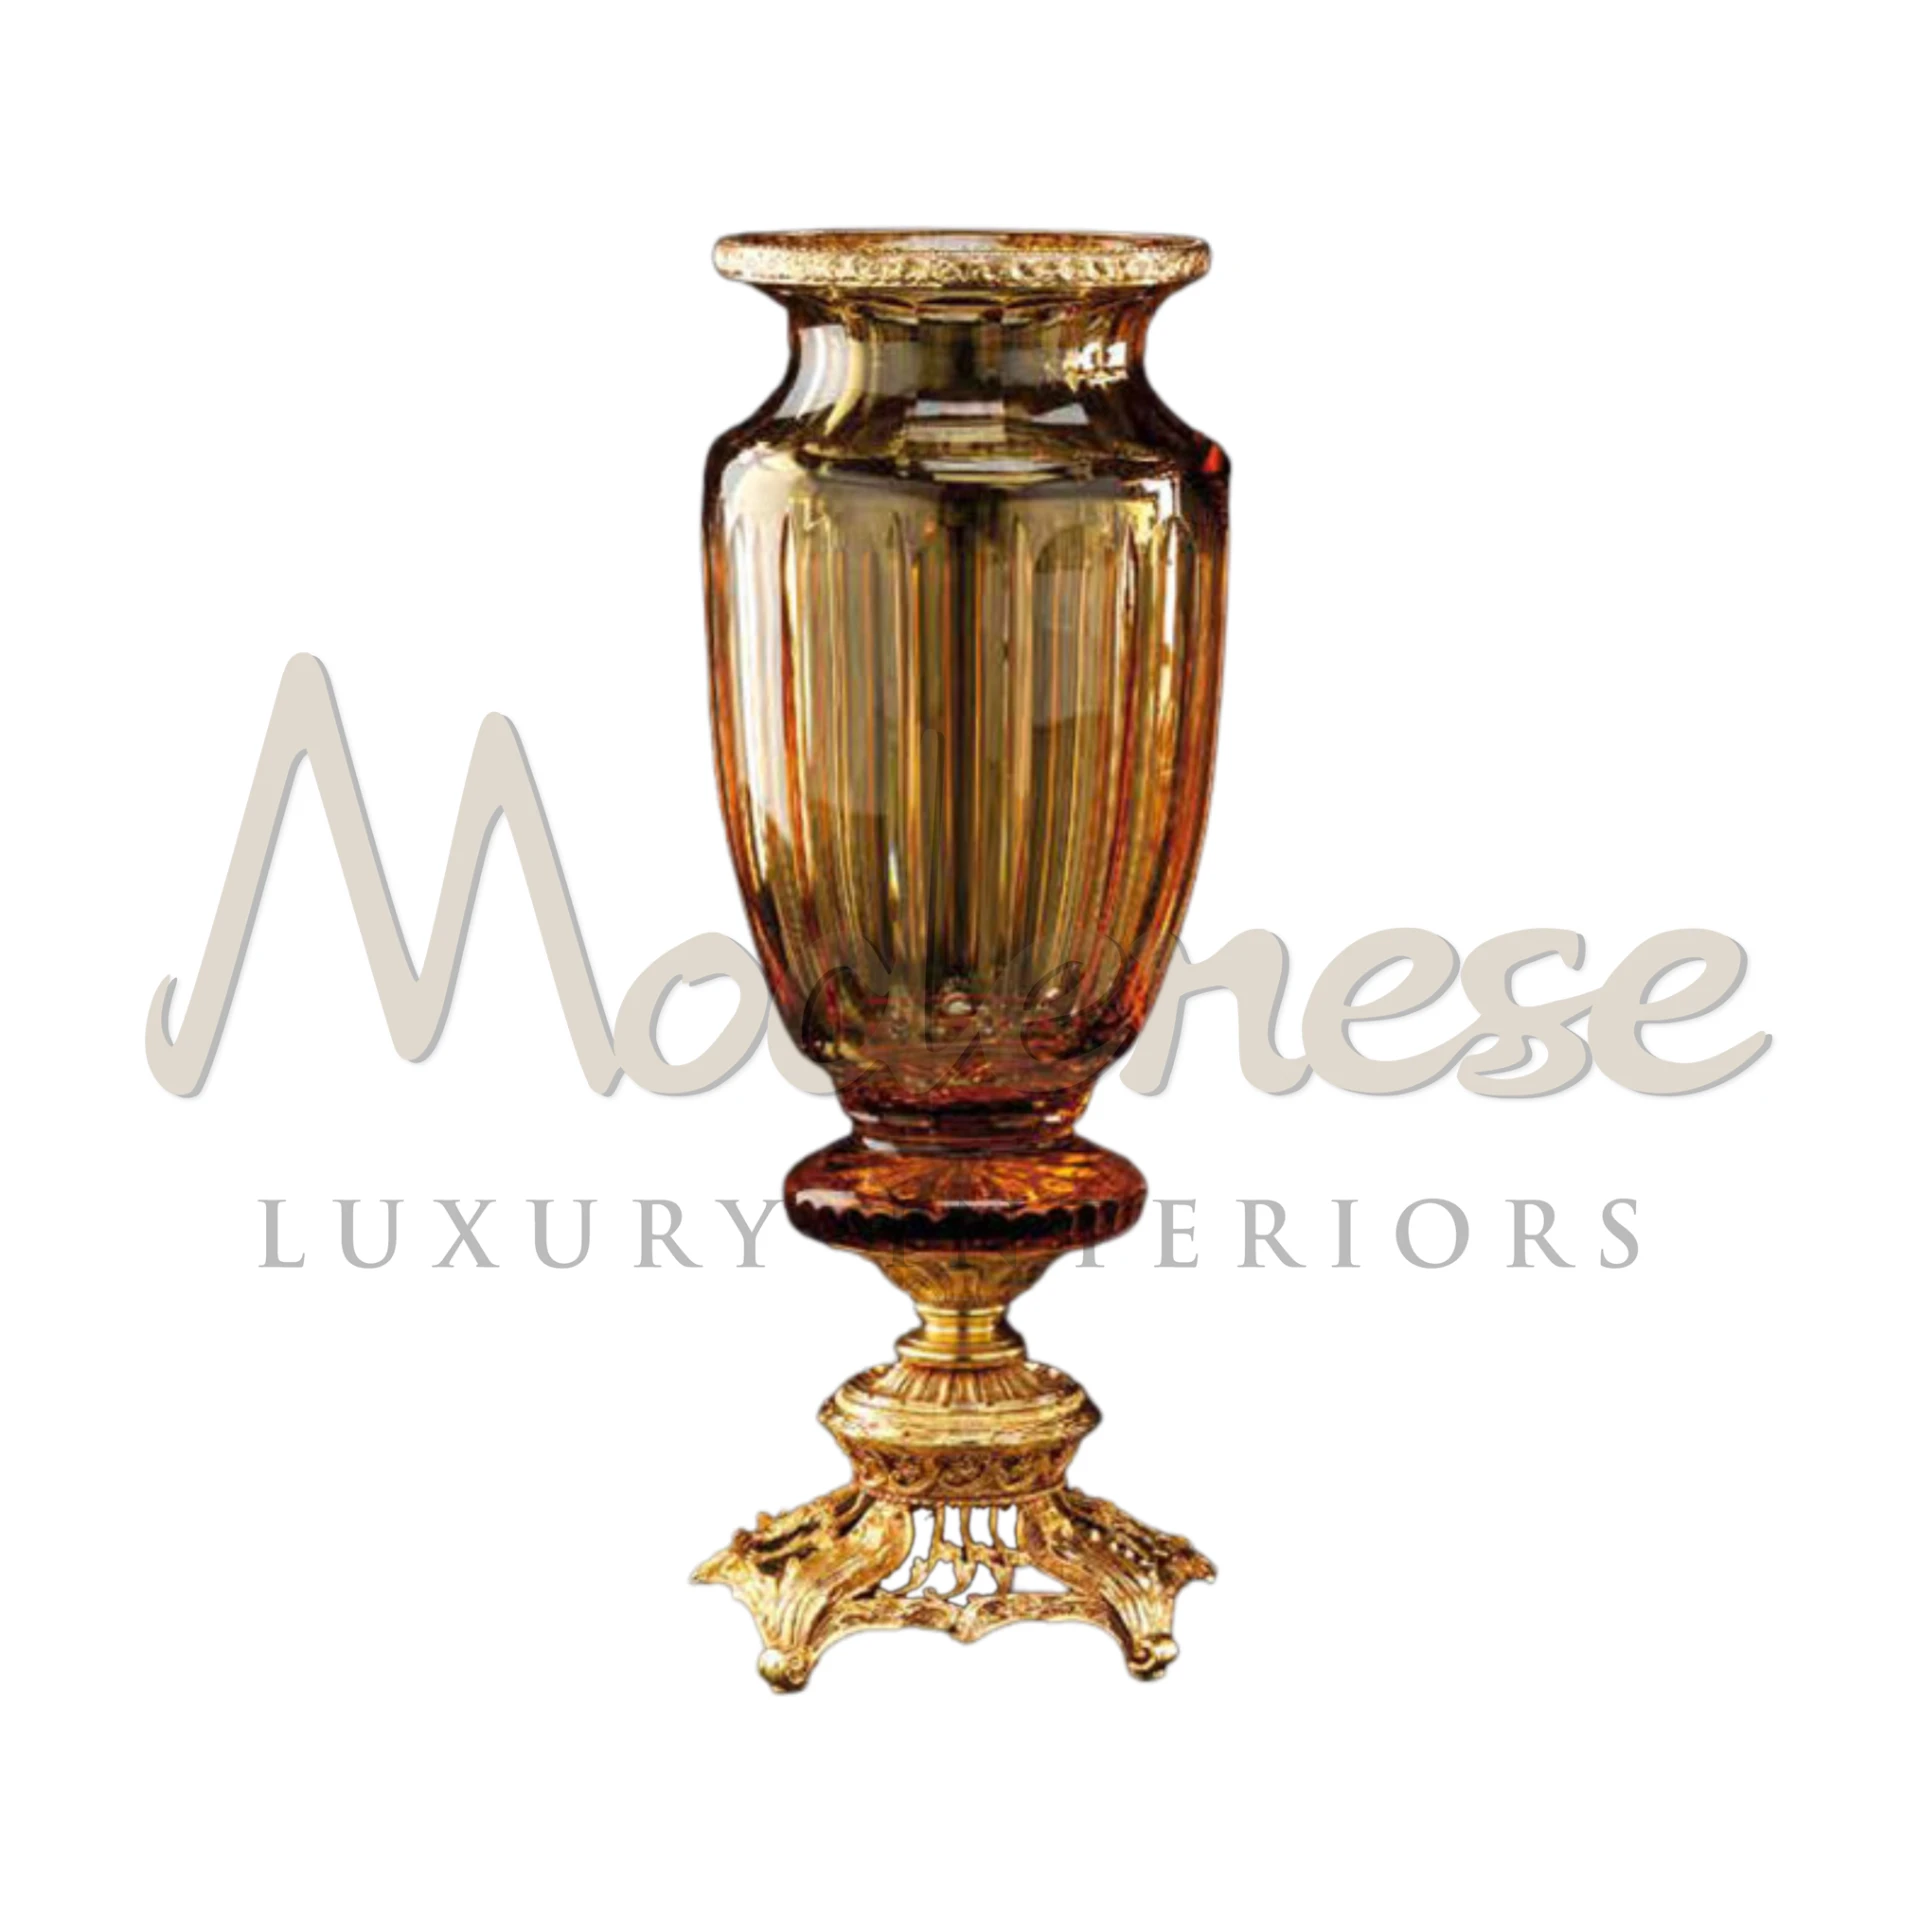 Crystal glass vase in Amphora style, blending ancient elegance with luxury, ideal for classic and baroque interior designs